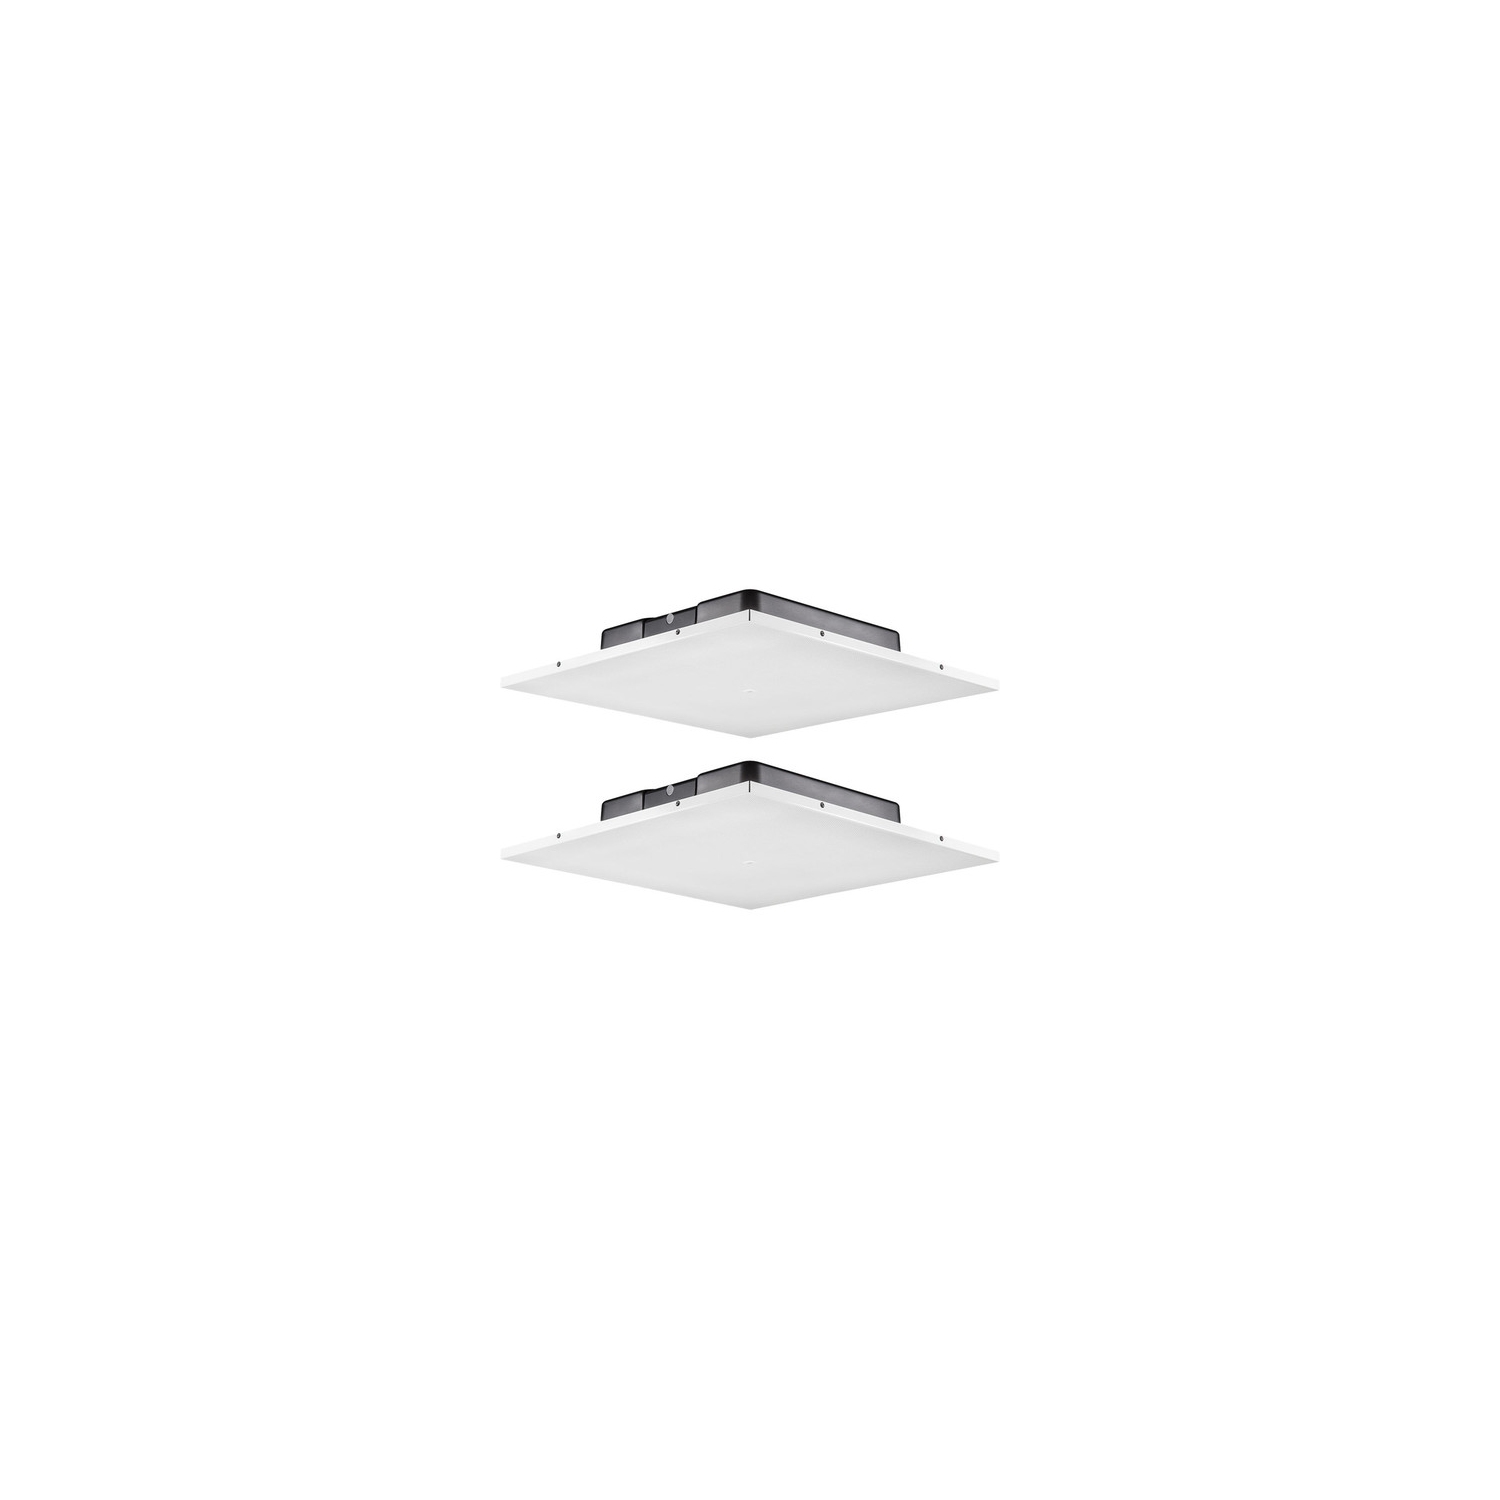 JBL LCT 81C/T Low-Profile Lay-In 2 x 2' Ceiling Tile Loudspeaker w/ 8" Driver (2-Pack, White)